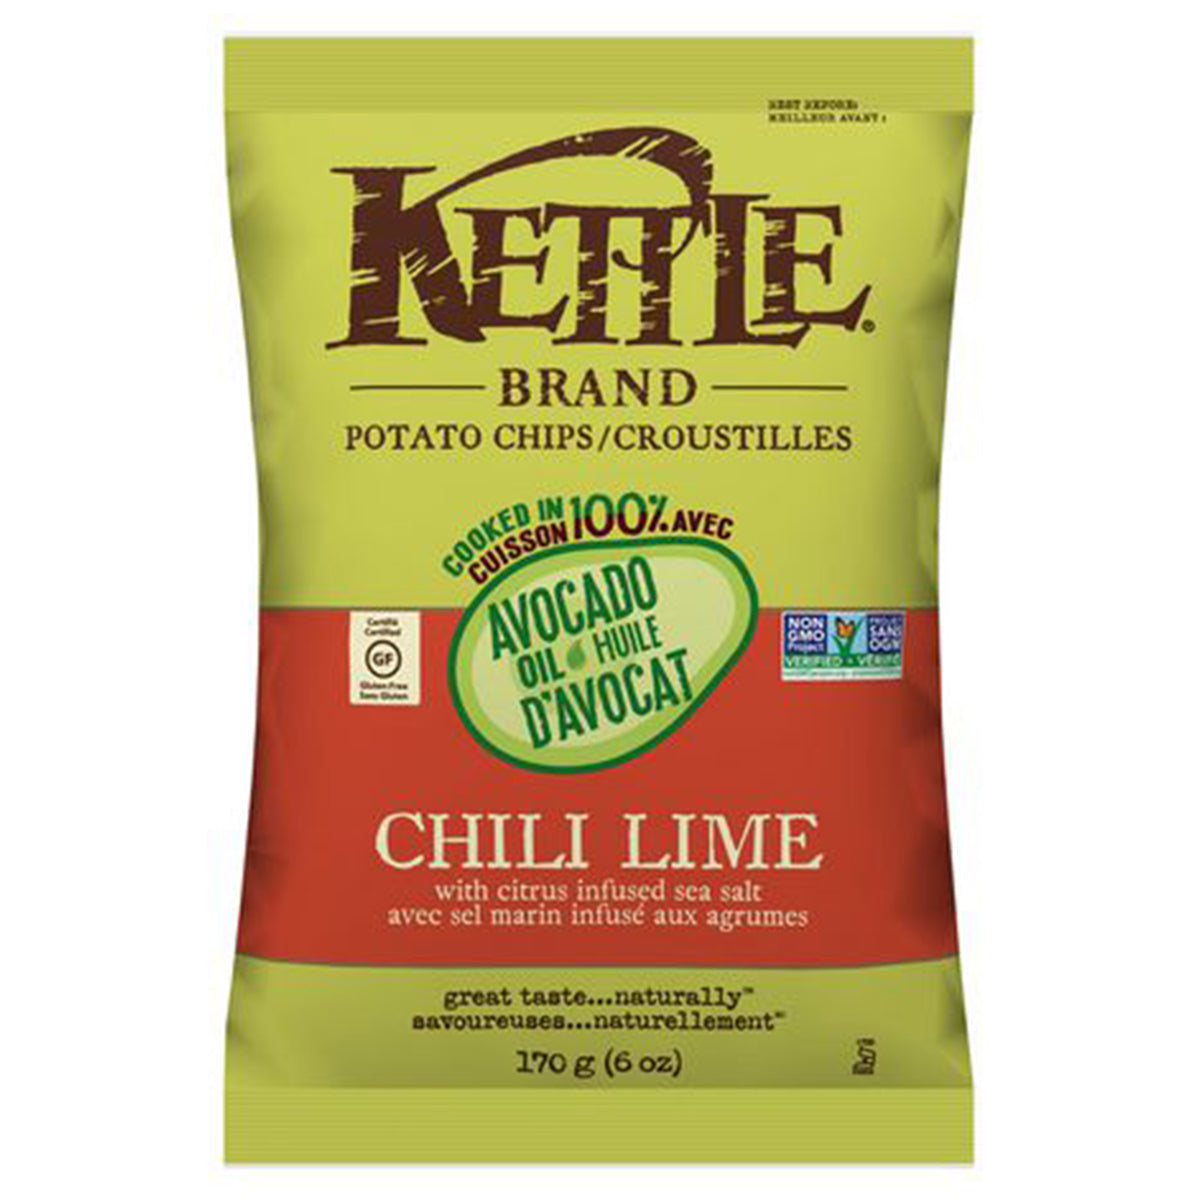 Kettle Chips Avocado Chili Lime, 170g